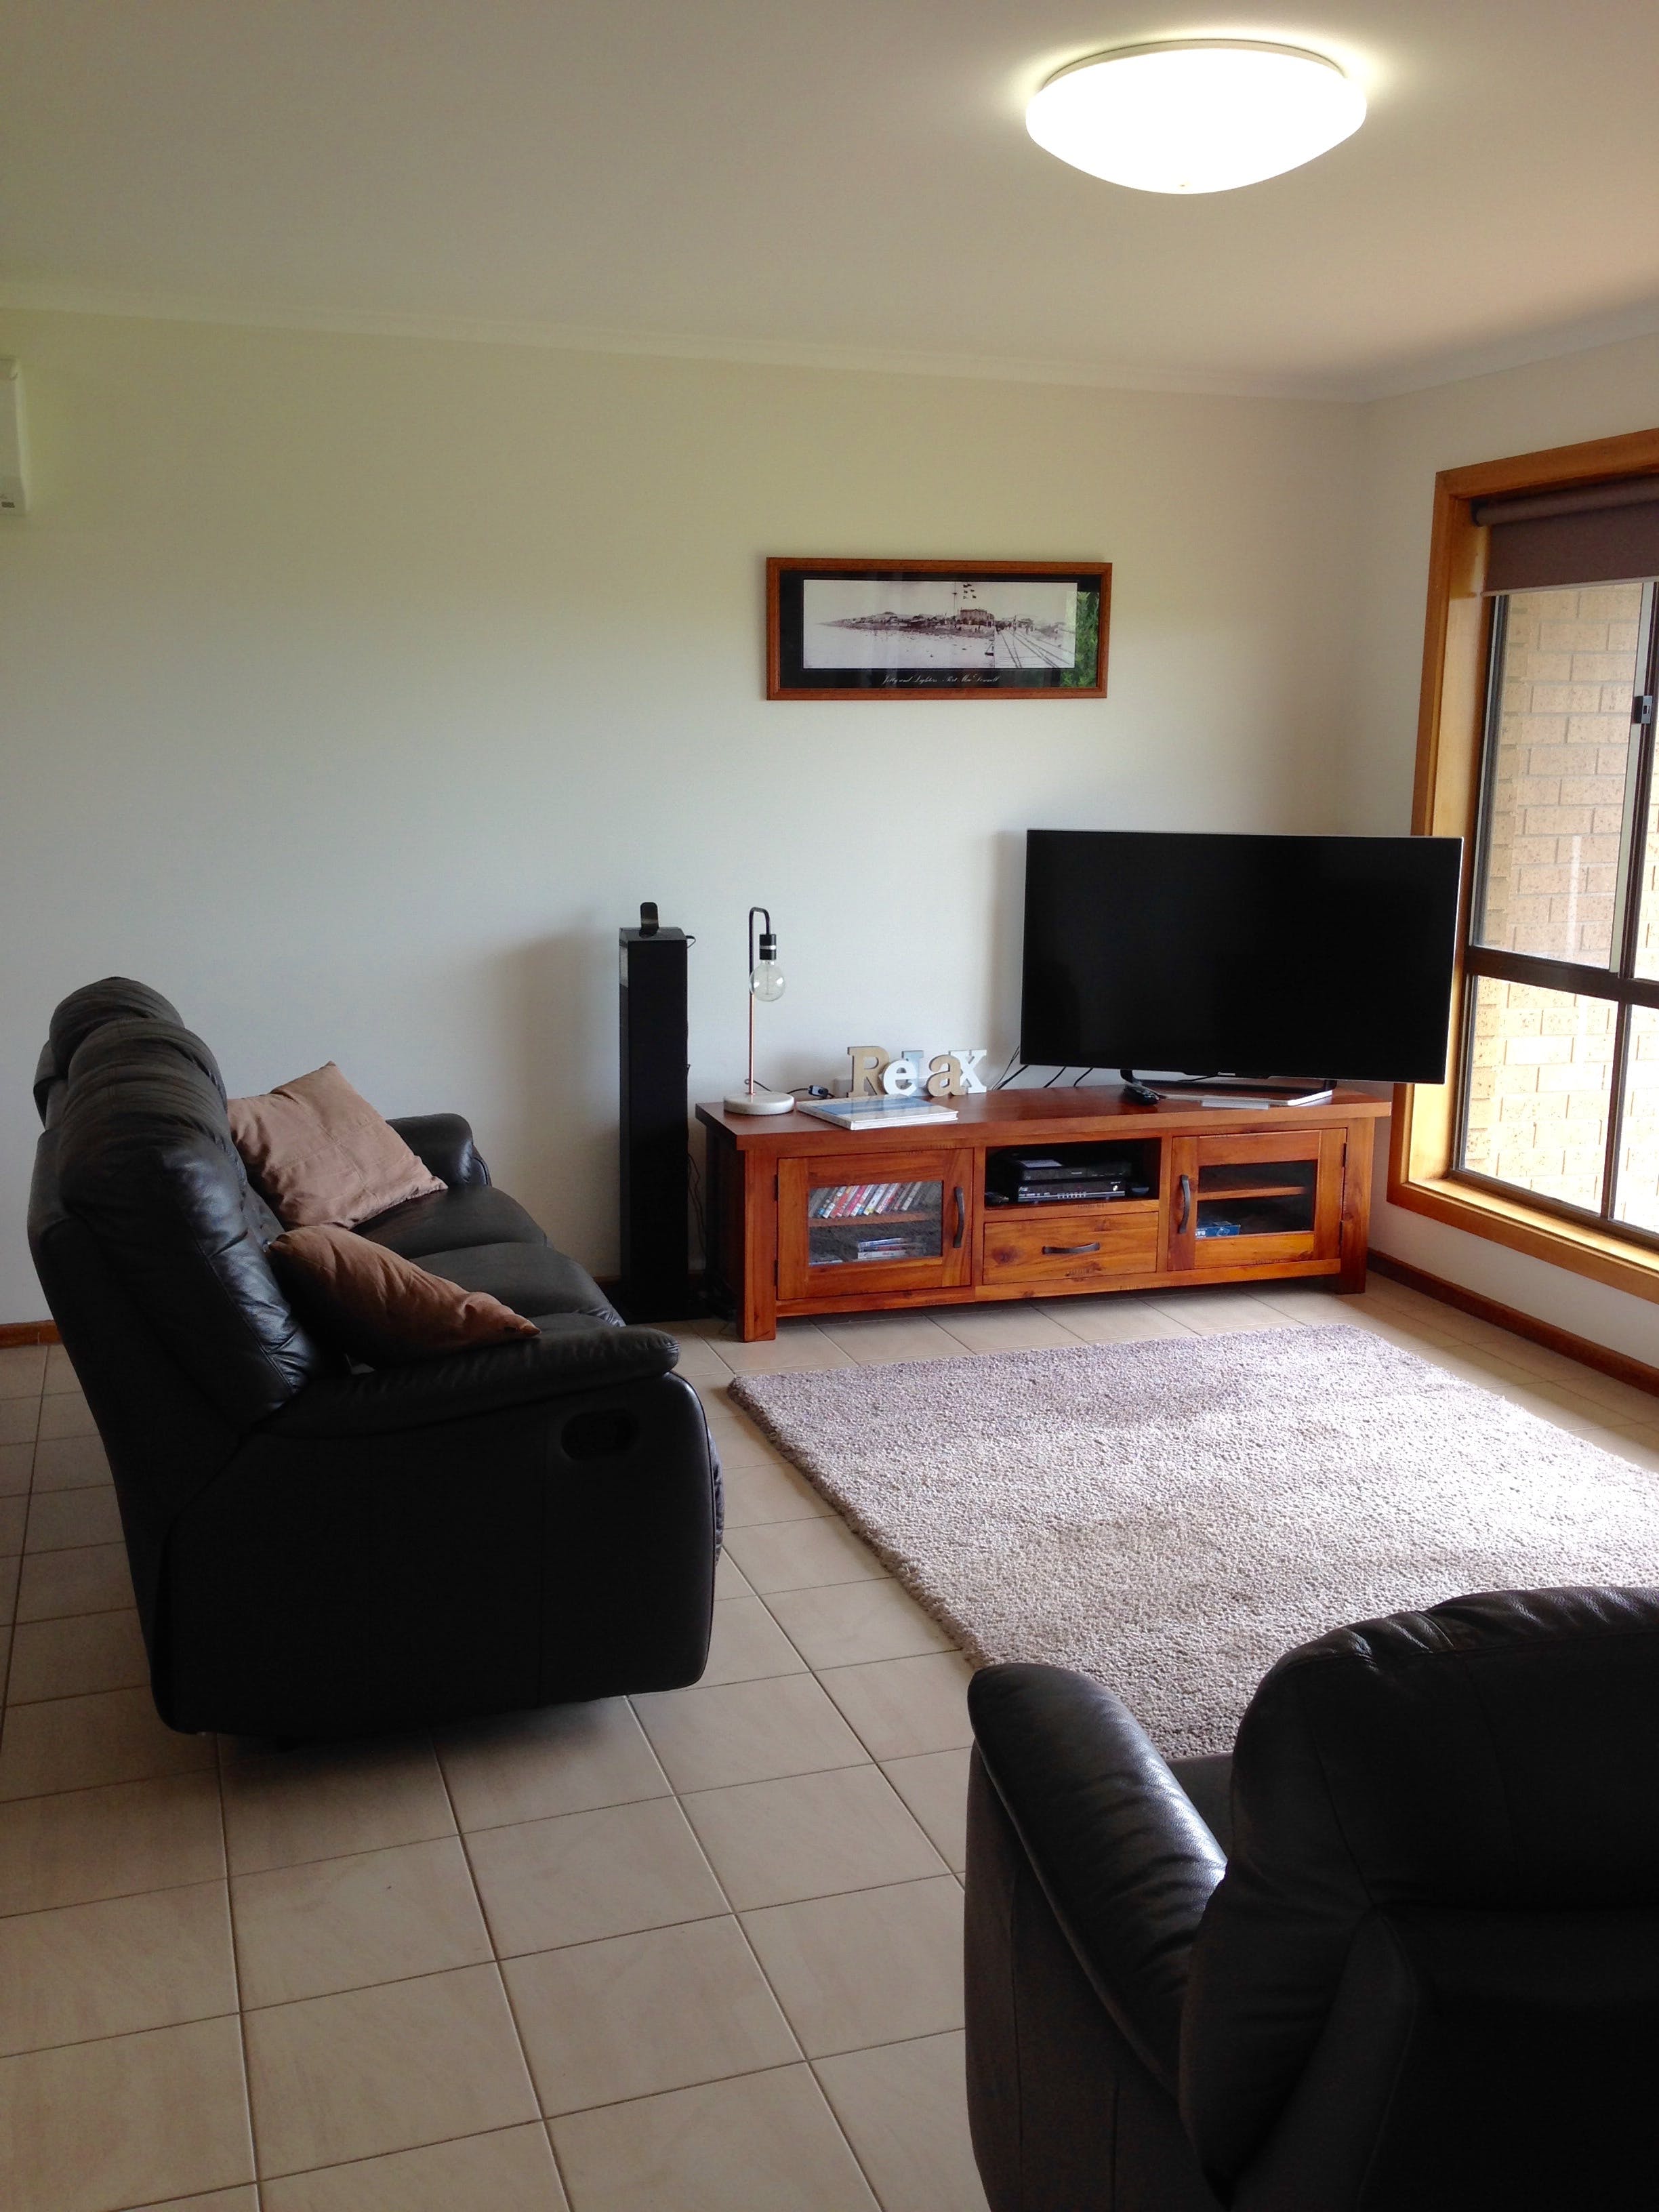 Springs Beach House - Accommodation Bookings